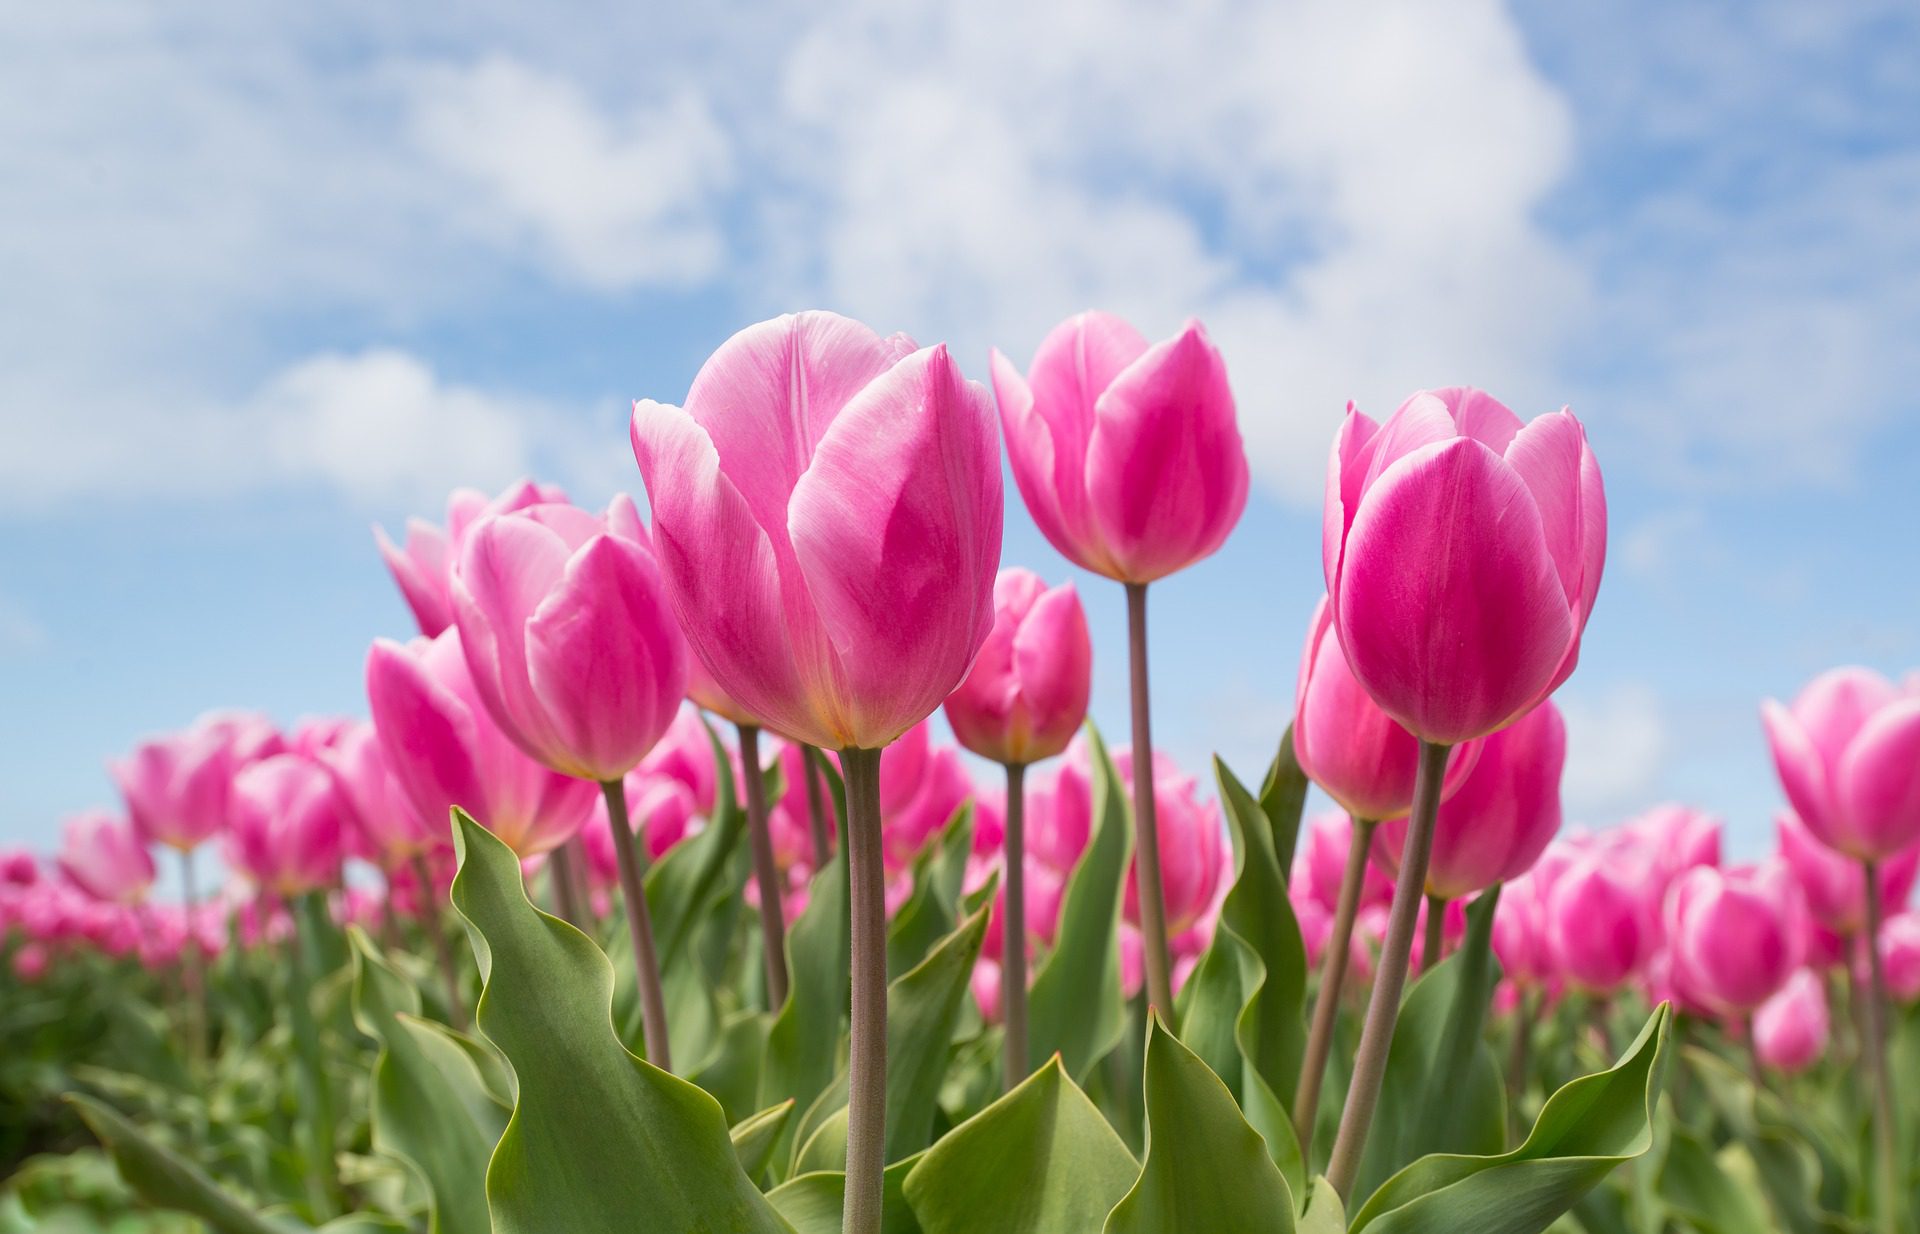 A field of pink flowers under the blue sky.